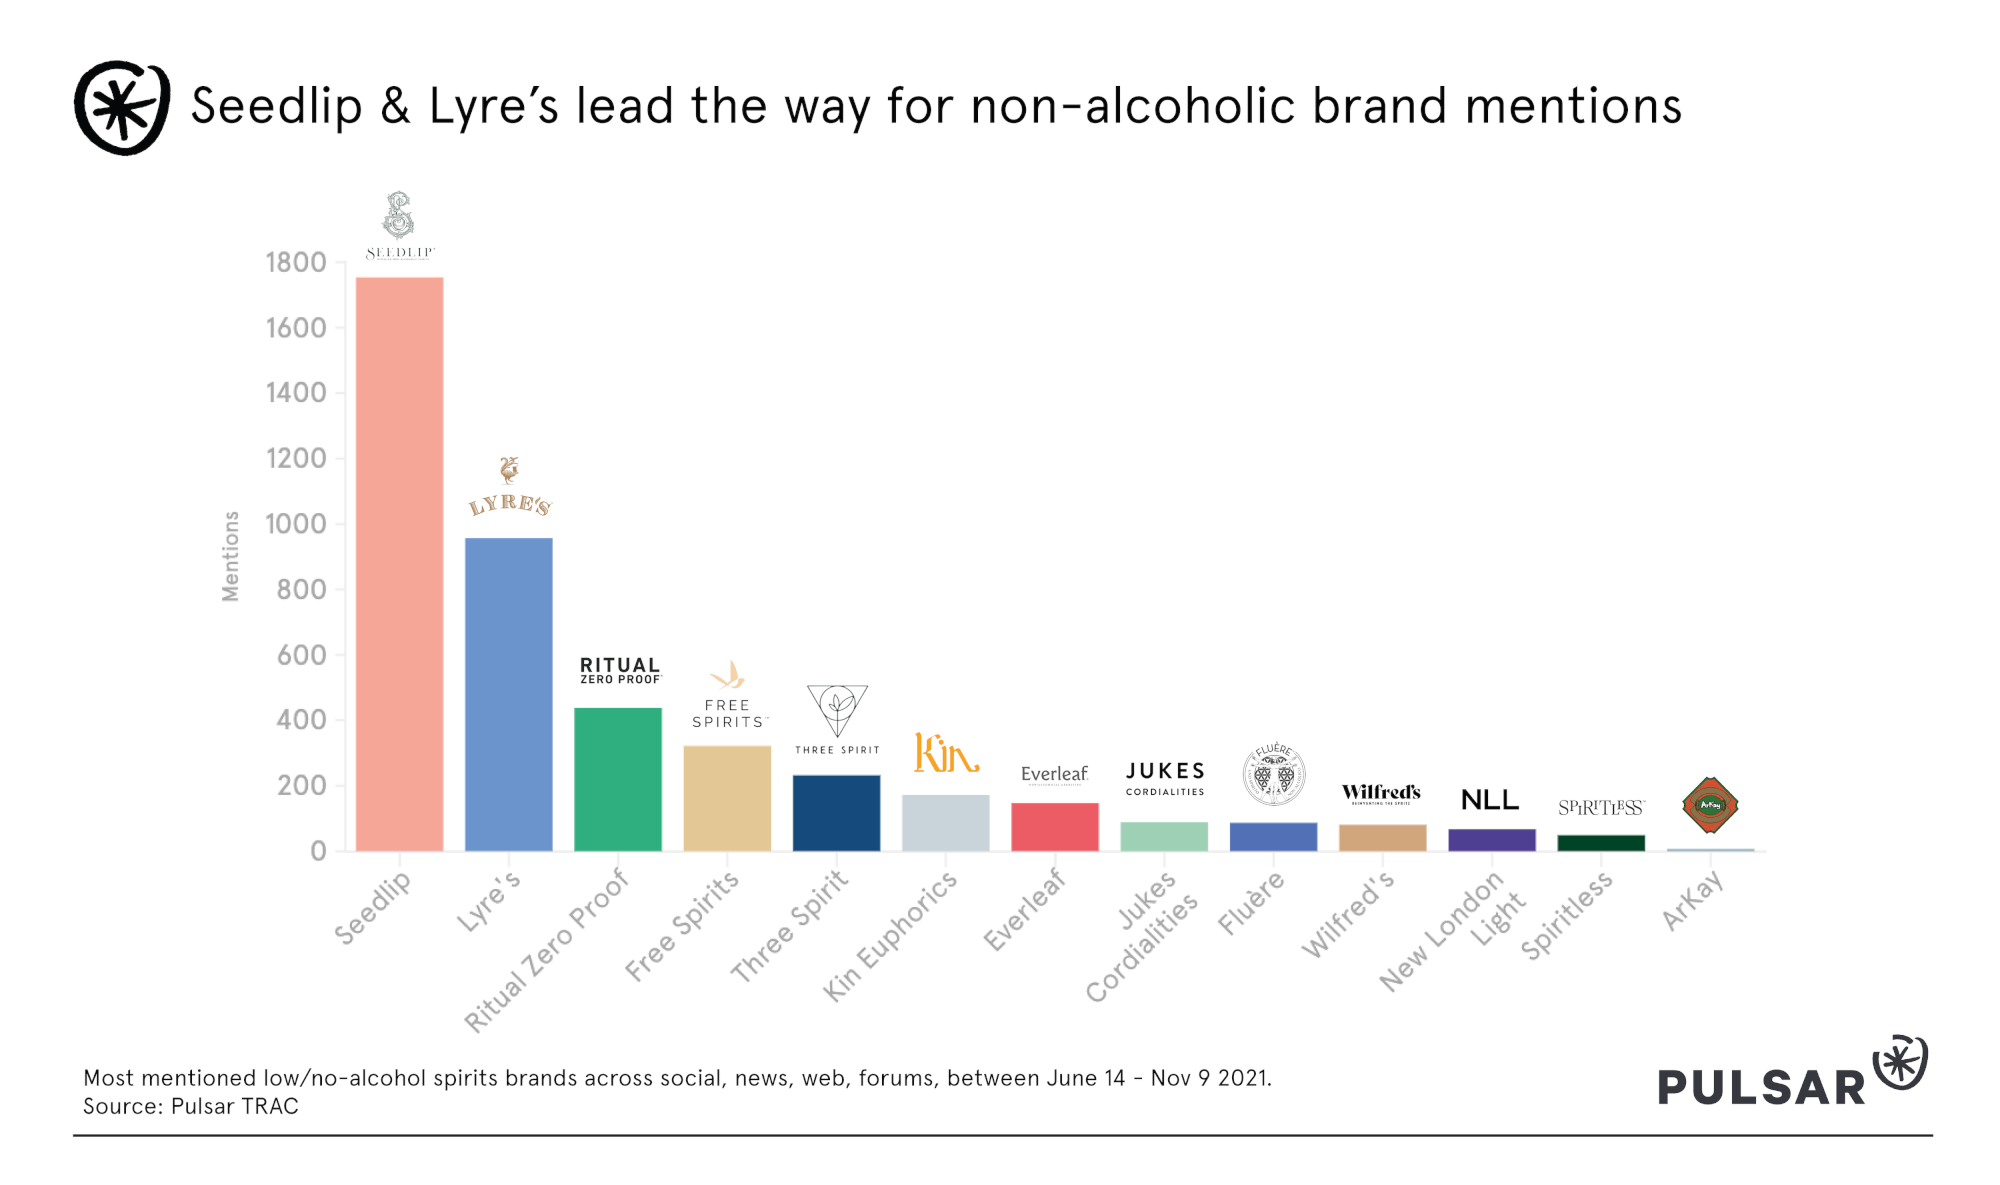 Seedlip & Lyre's lead the way for non-alcoholic brand mentions